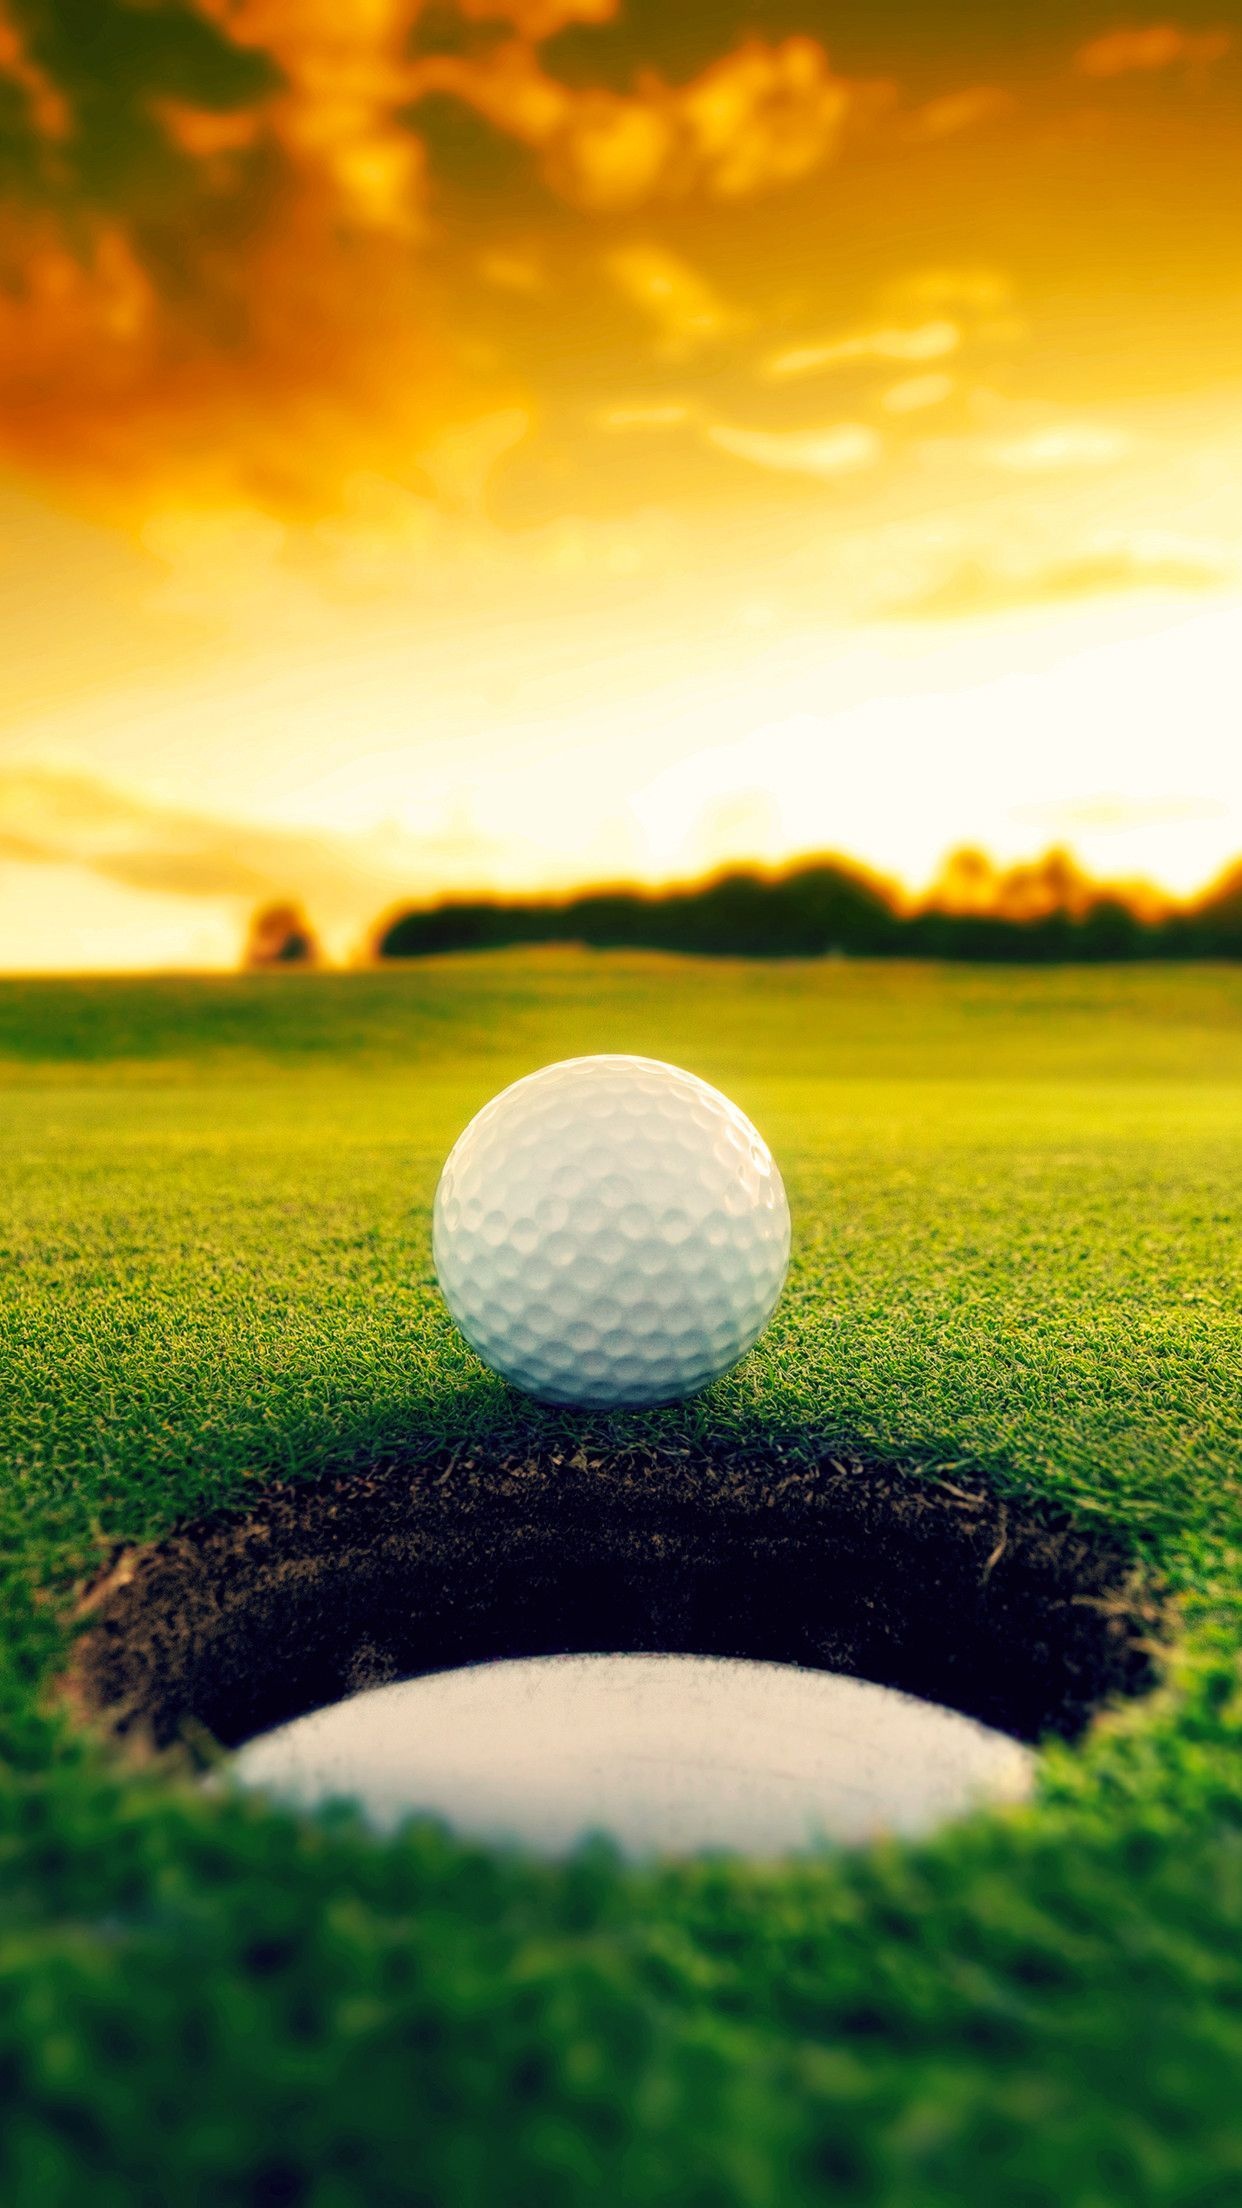 Golf phone wallpapers, Serene landscapes, Golf course scenery, Relaxing sport, 1250x2210 HD Handy